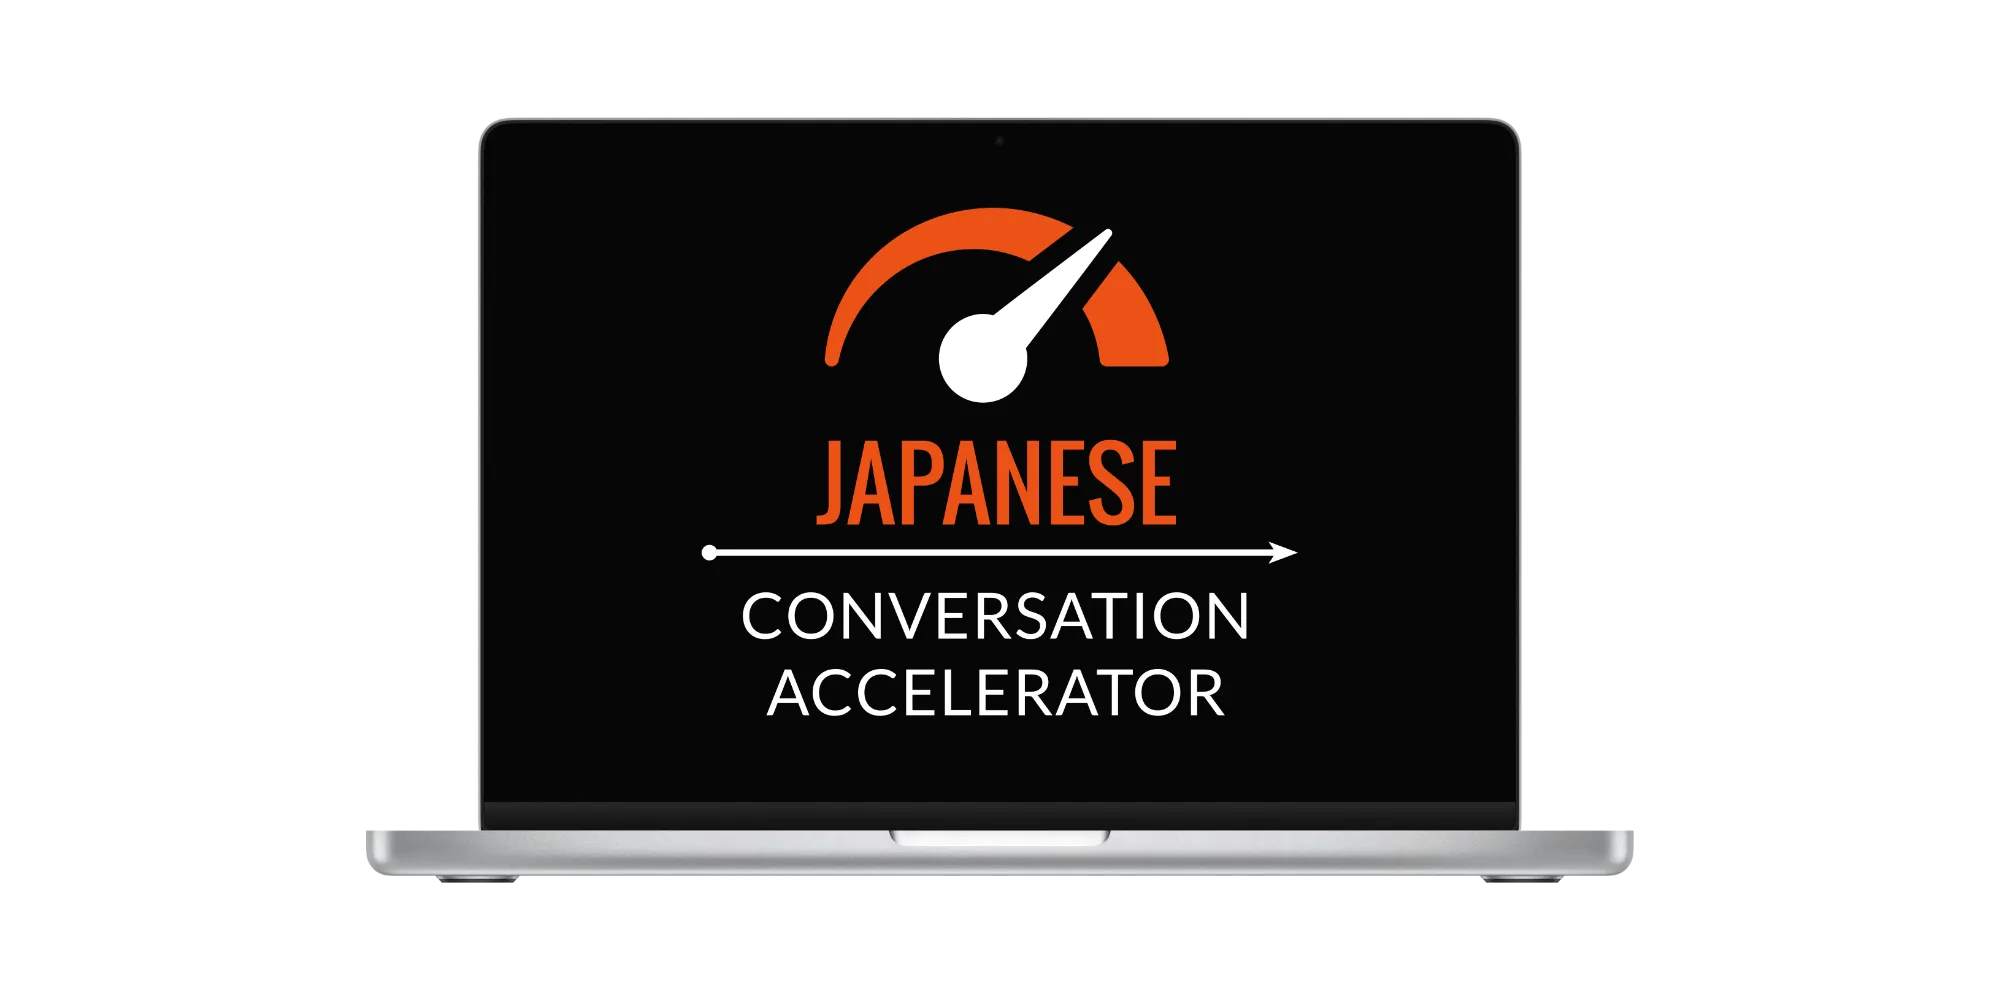 50% OFF The Japanese Conversation Accelerator